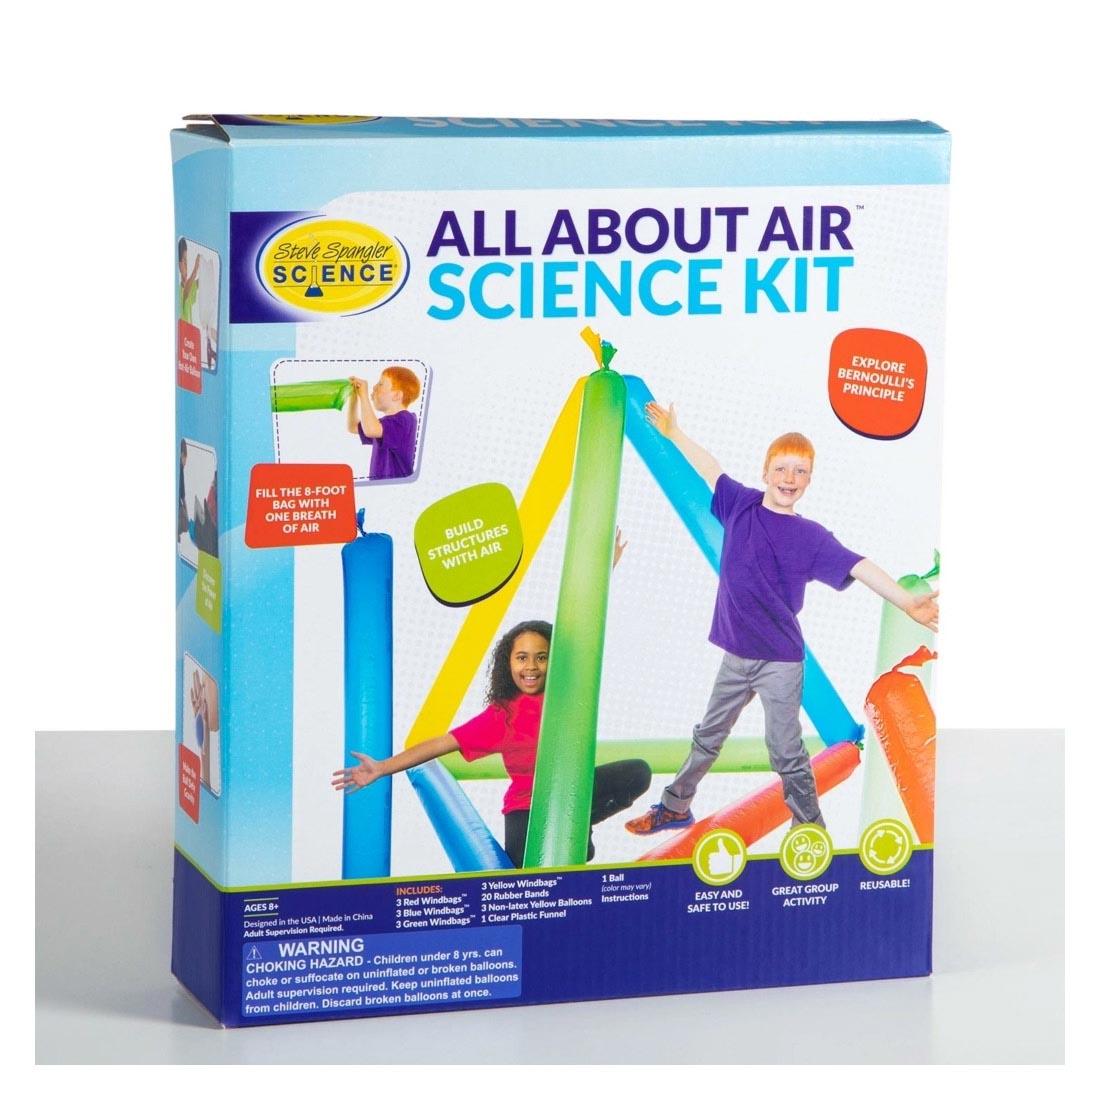 All About Air Science Kit By Steve Spangler Science